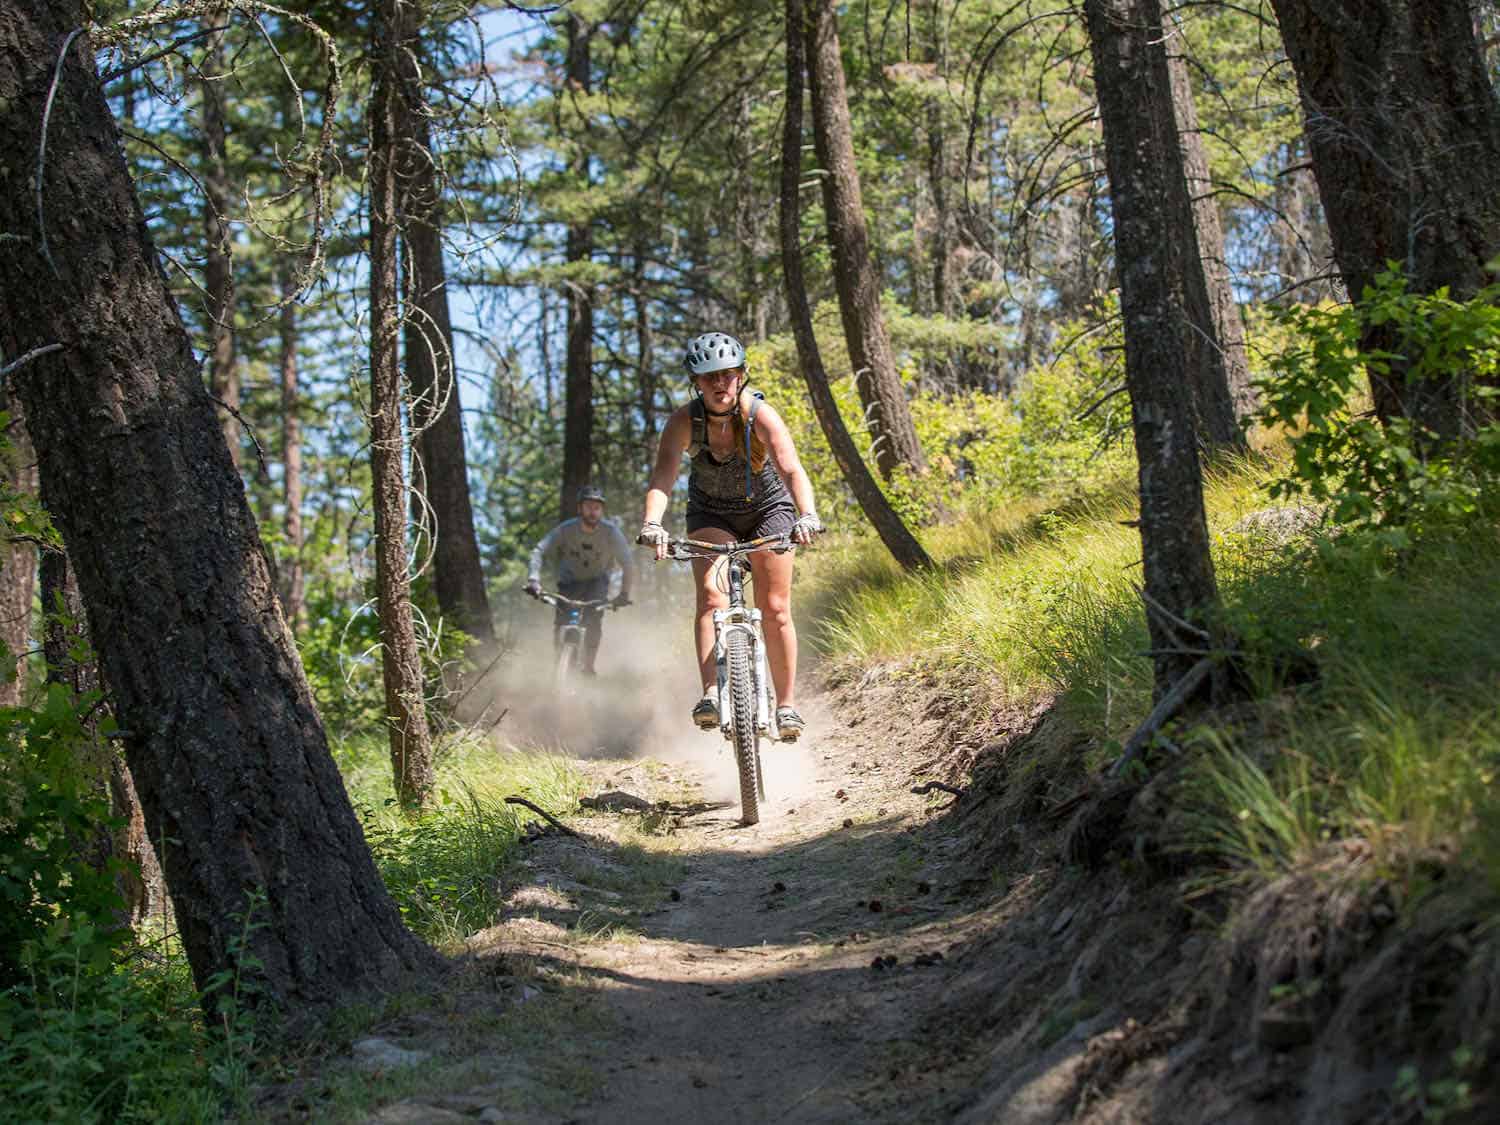 Two mountain bikers riding a trail in the woods.